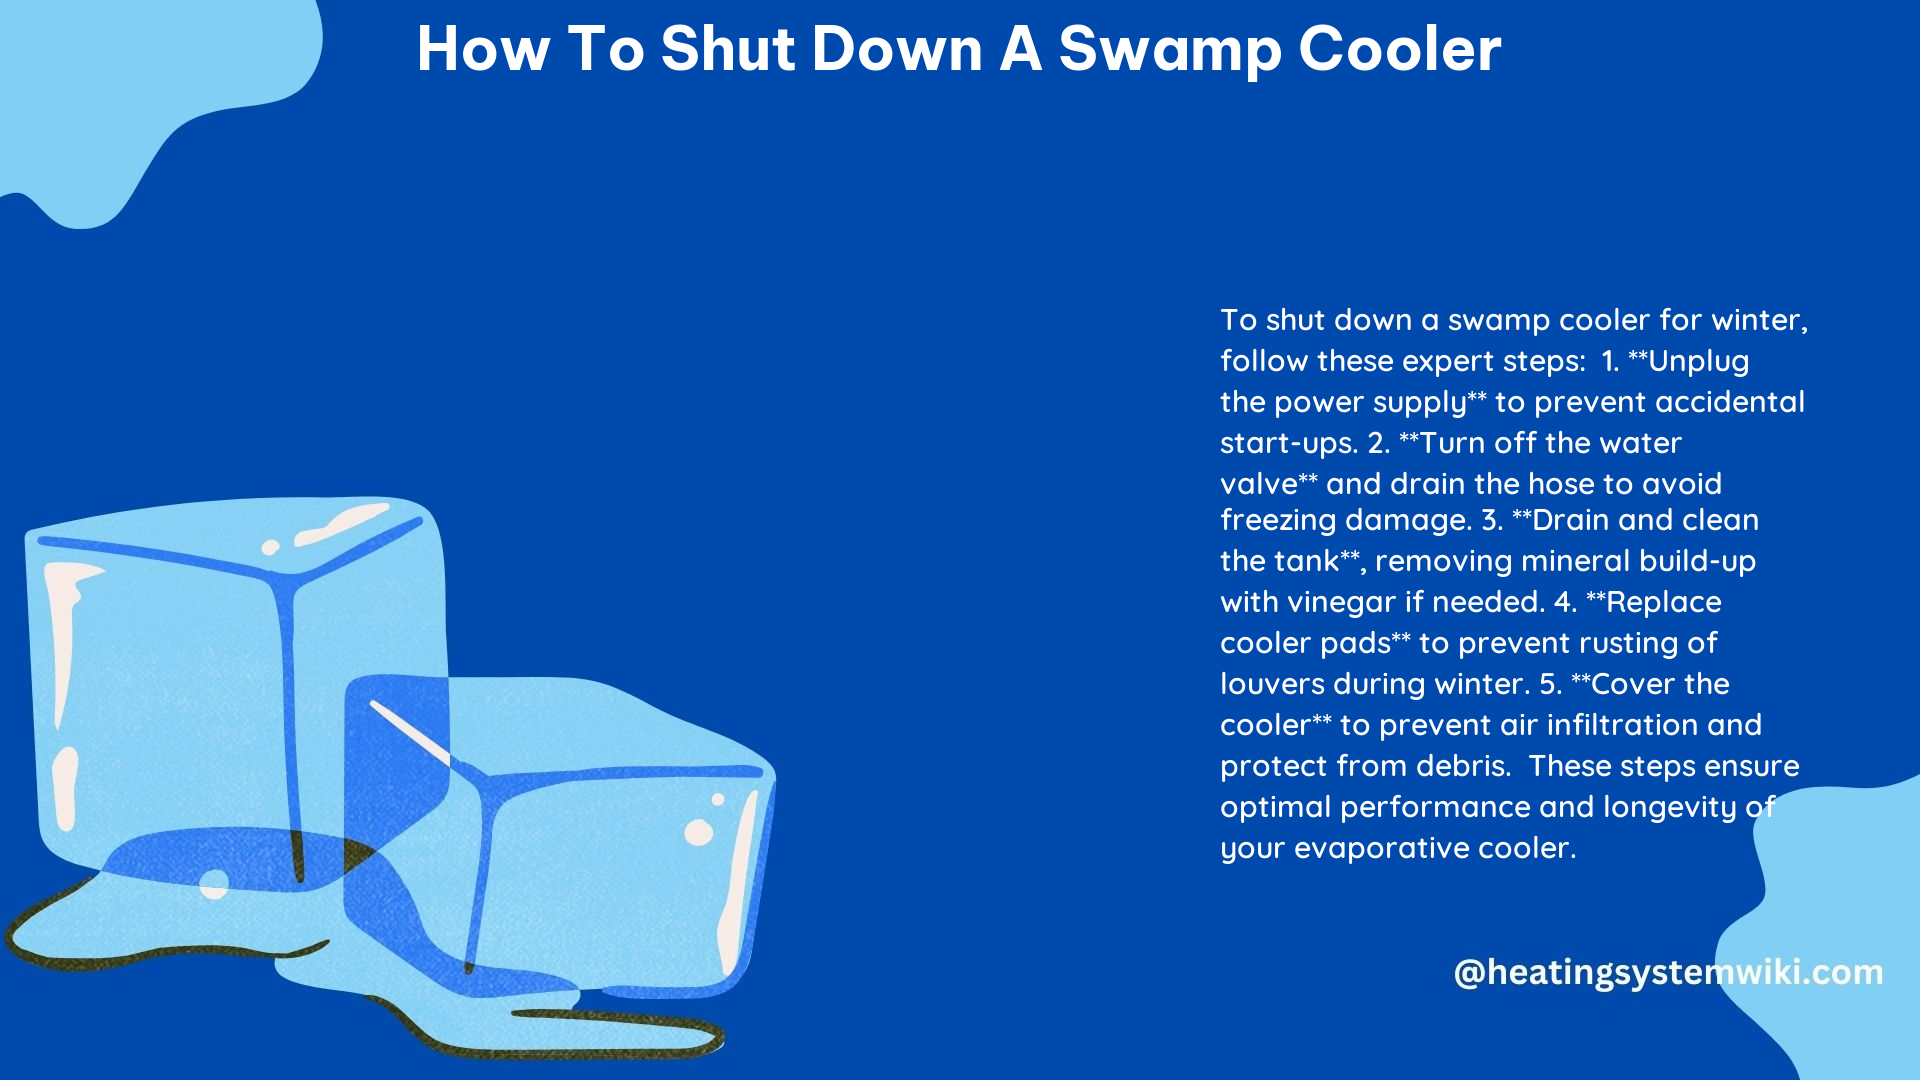 How to Shut down a Swamp Cooler